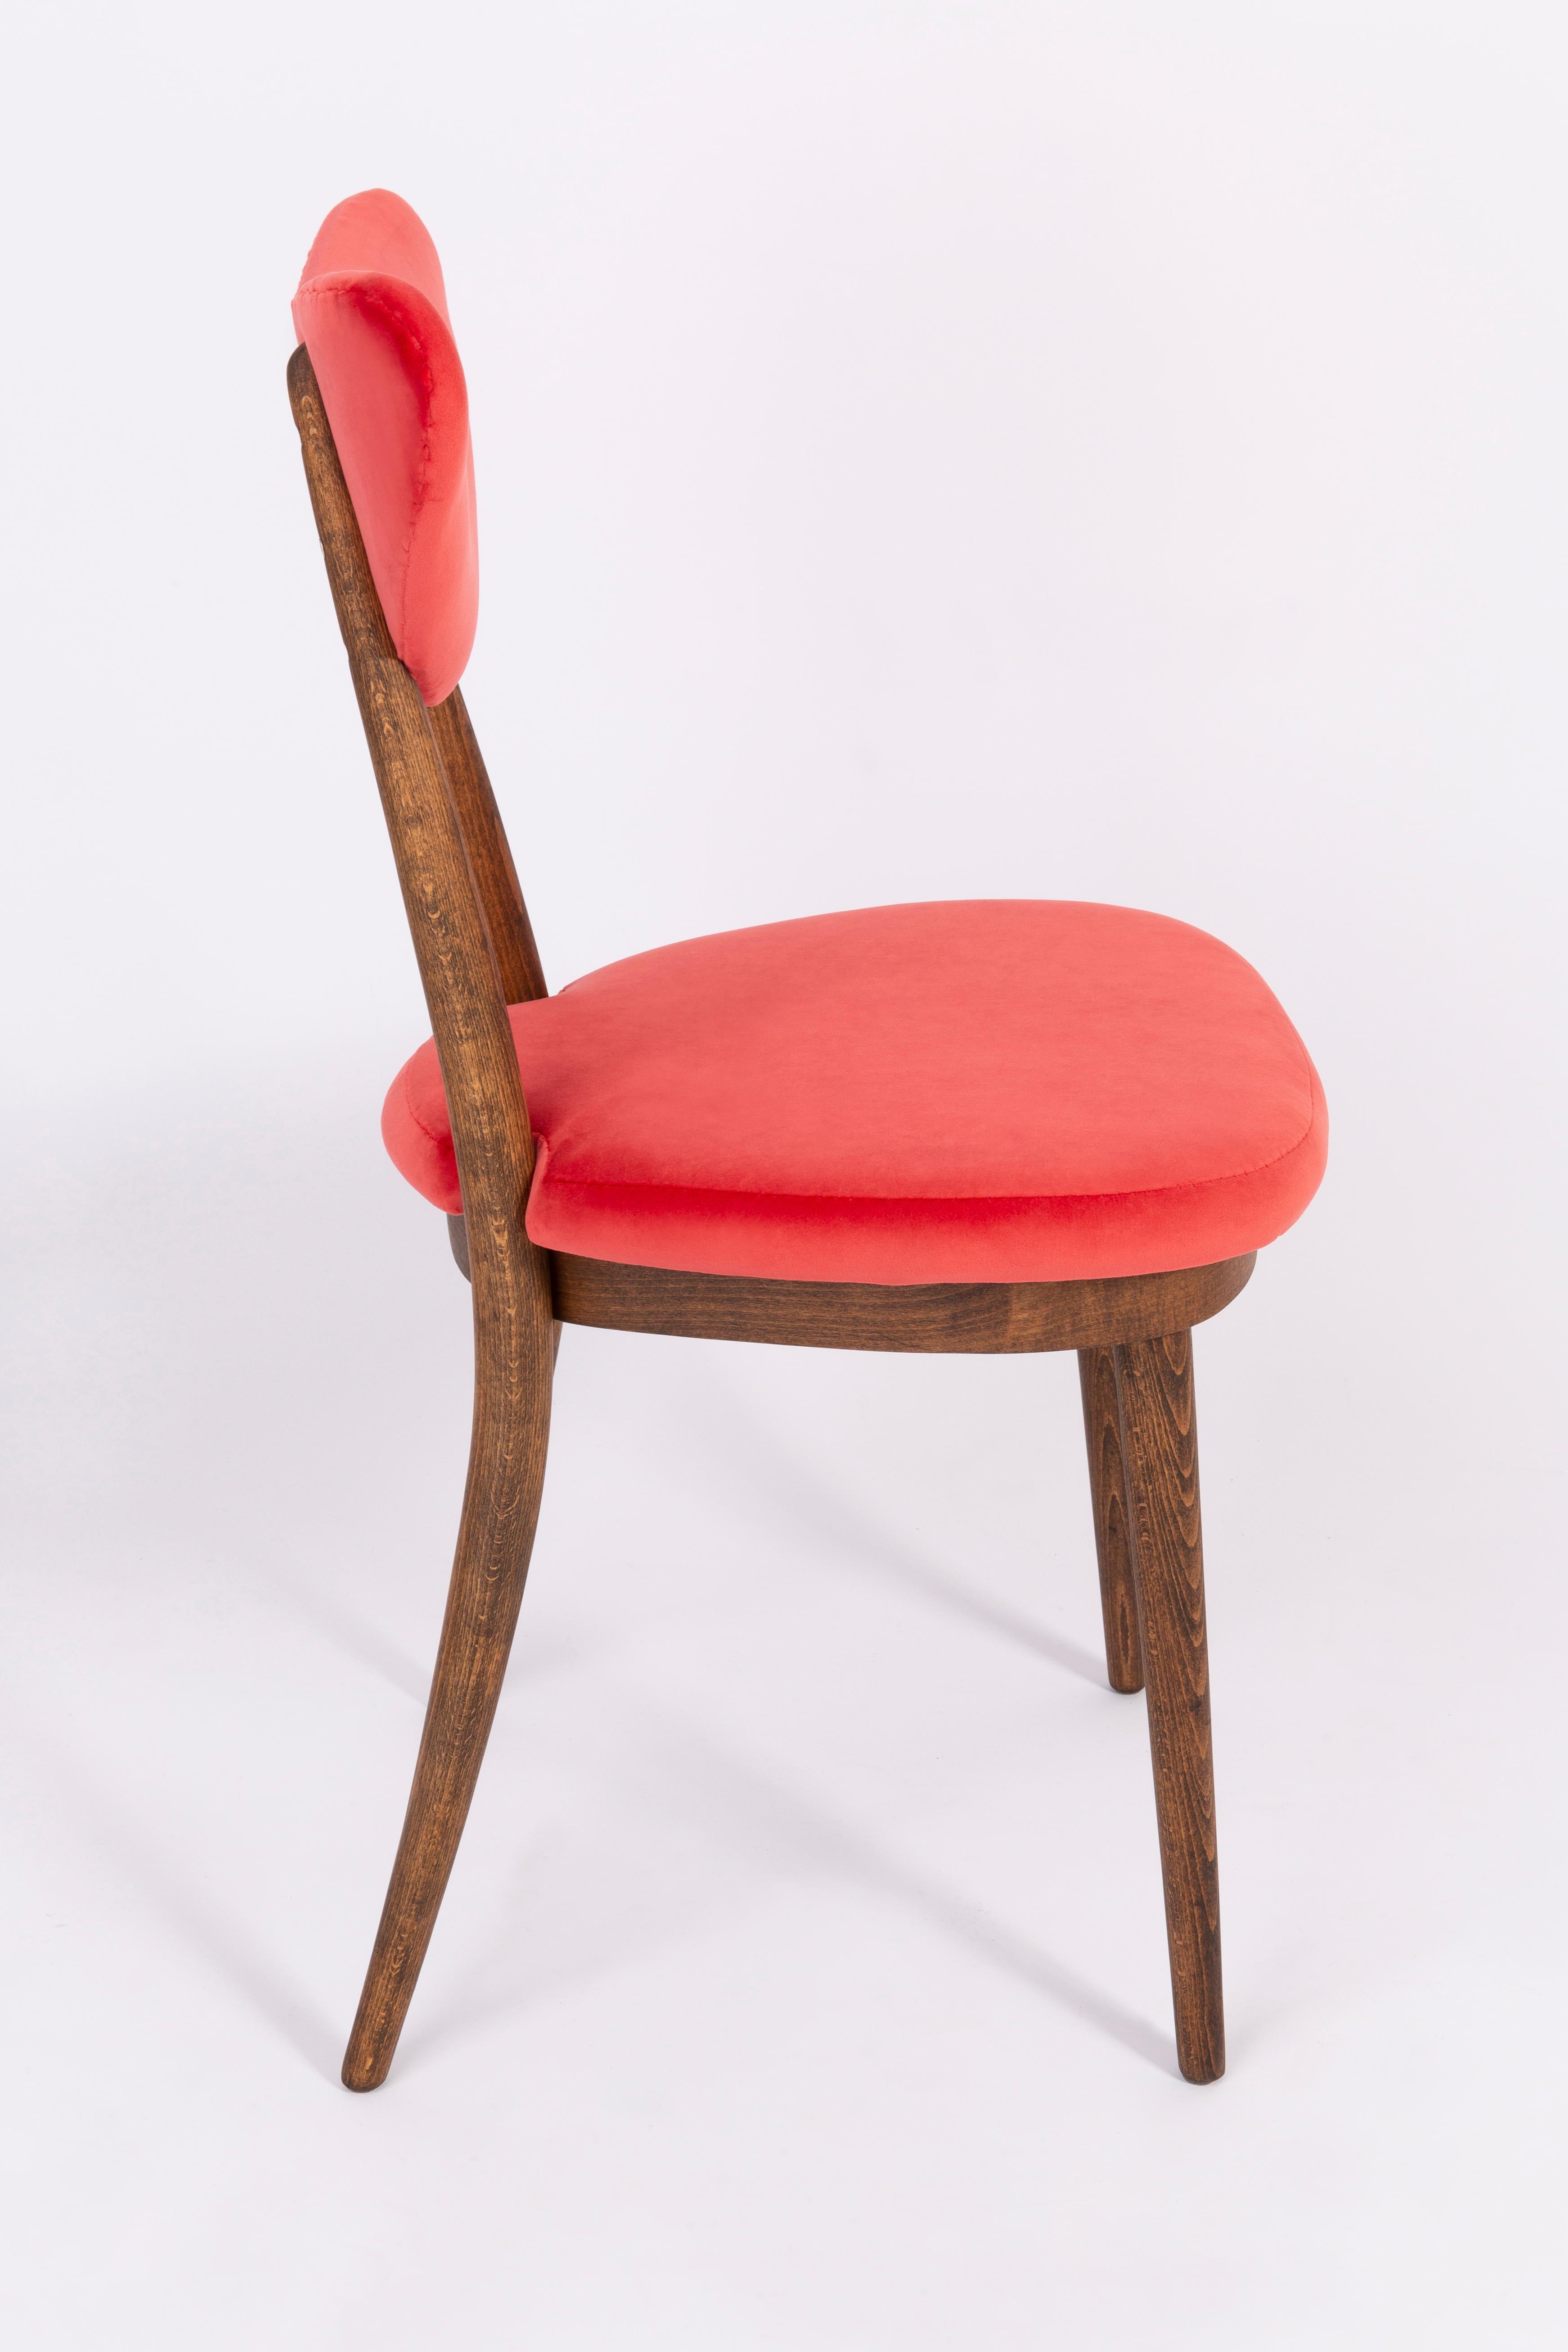 Set of Two Red Heart Chairs, Poland, 1960s For Sale 3